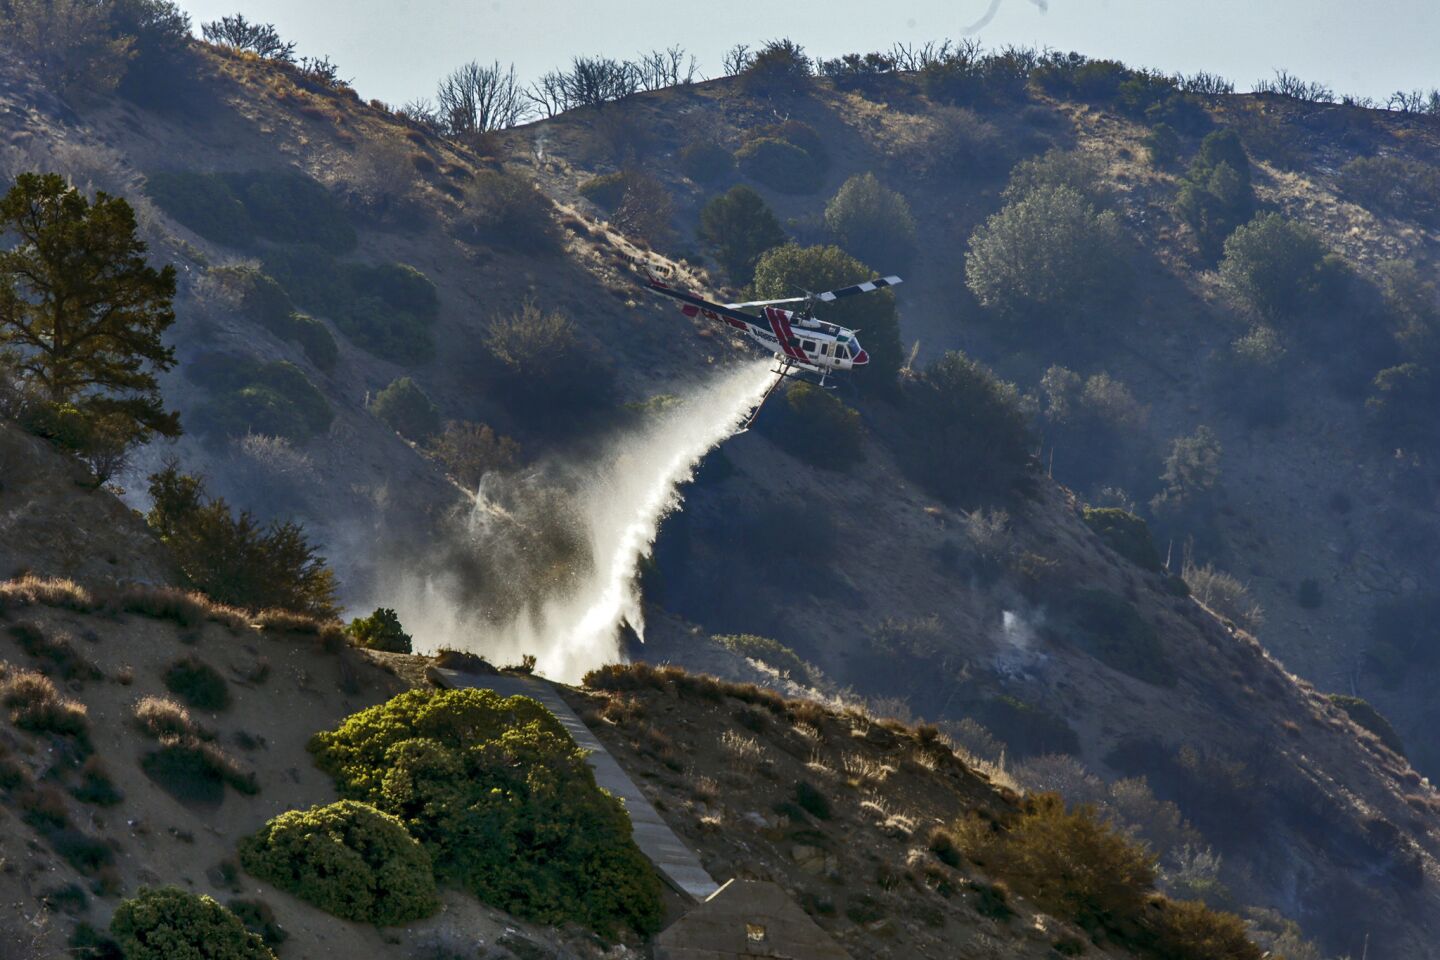 A CalFire helicopter makes a water drop on still smoldering remnants of Blue Cut Fire on the hilltop ridges along Hwy 2 in Wrightwood.